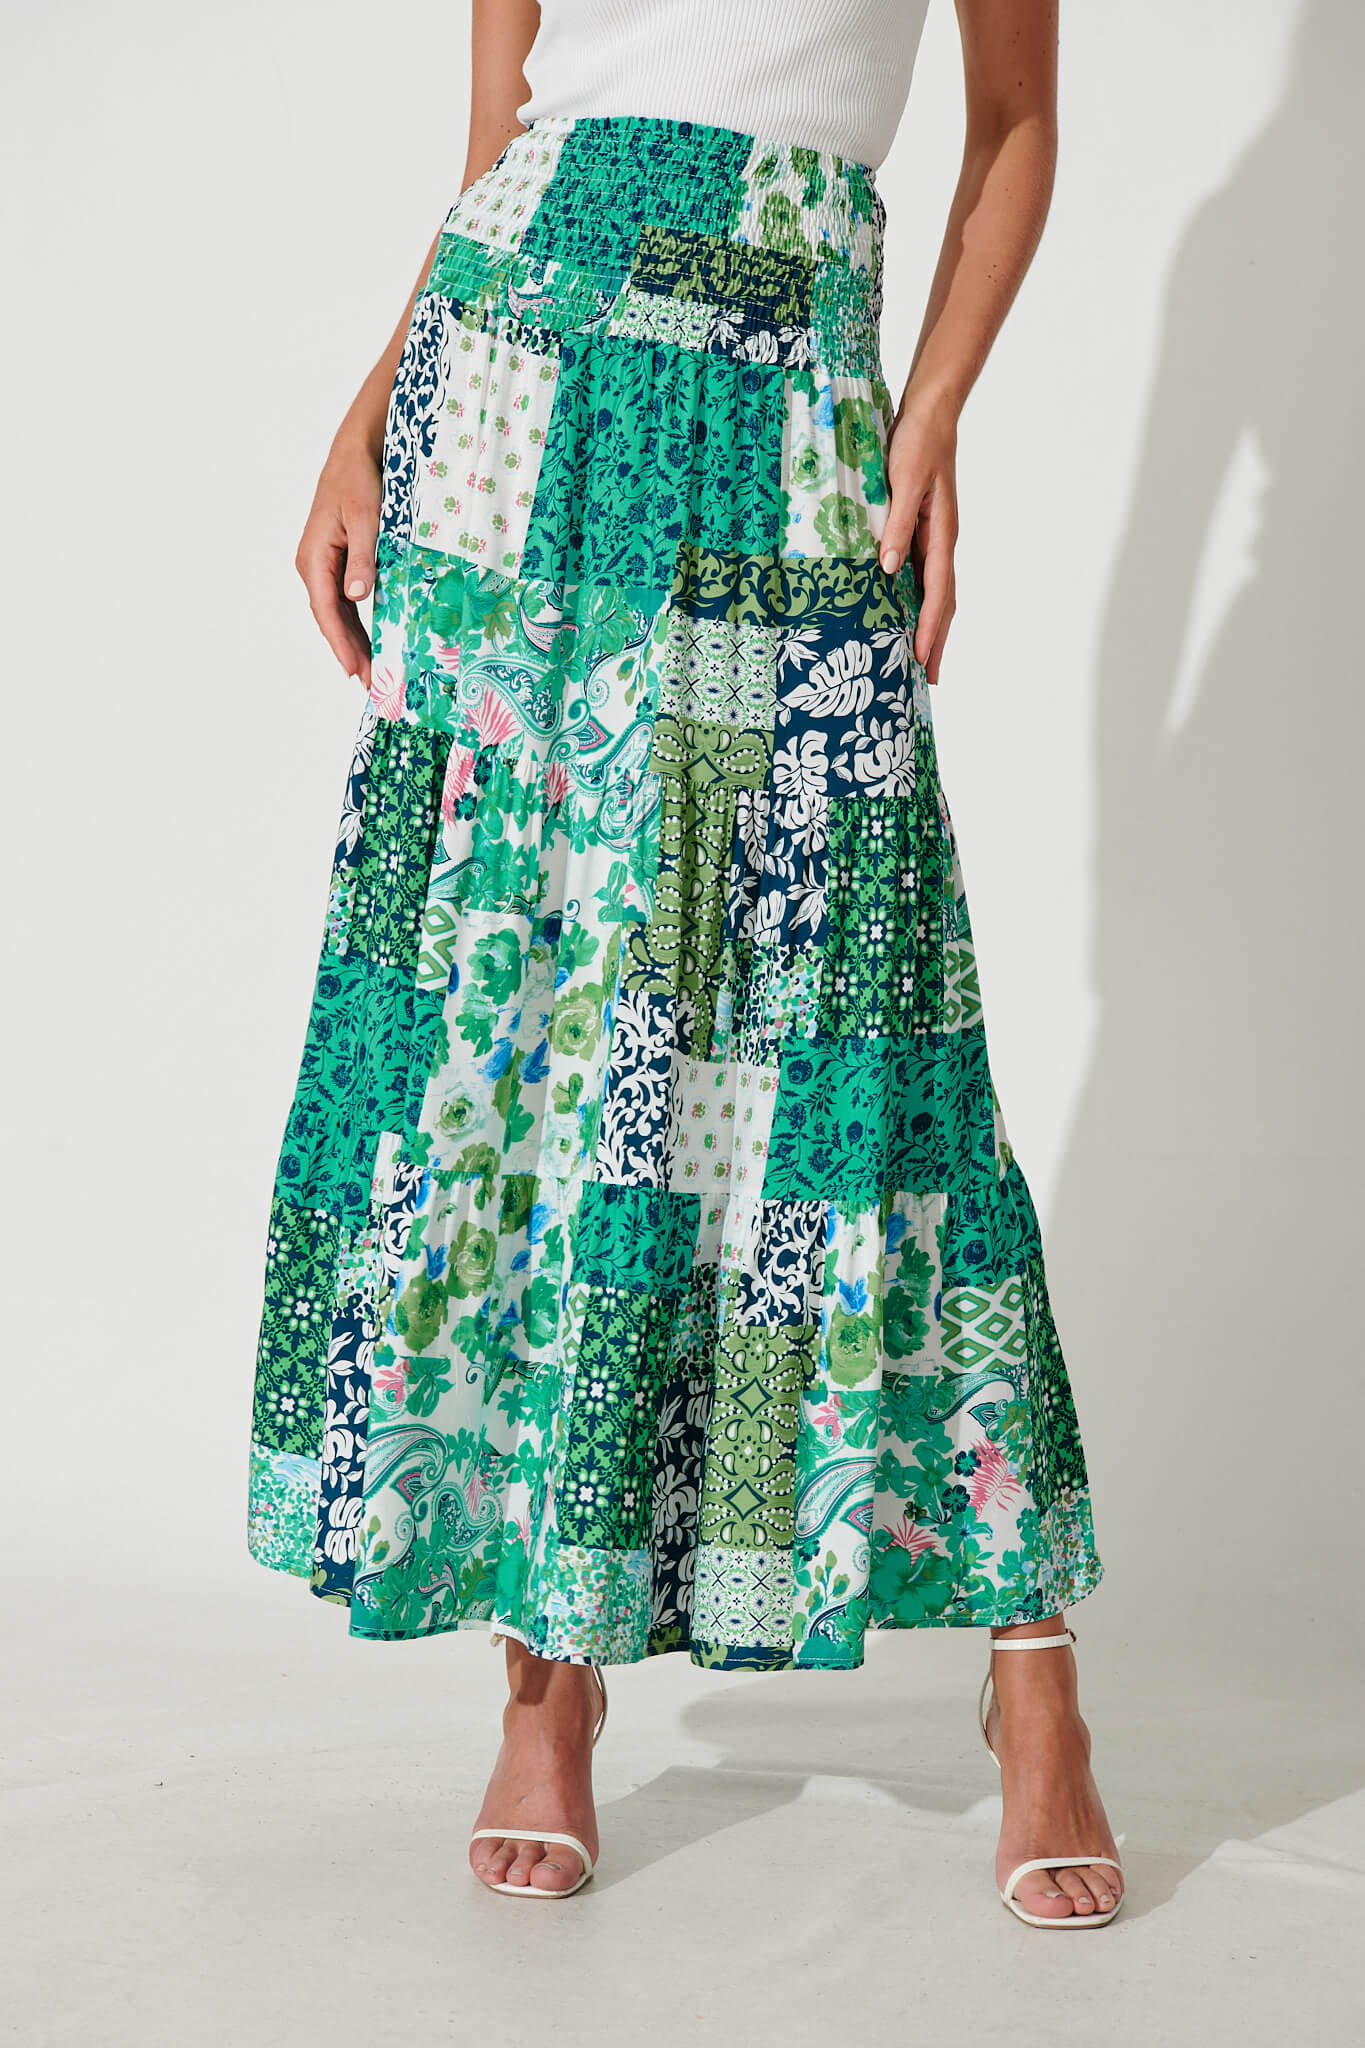 Macarena Maxi Skirt In Multi Green Patchwork - front